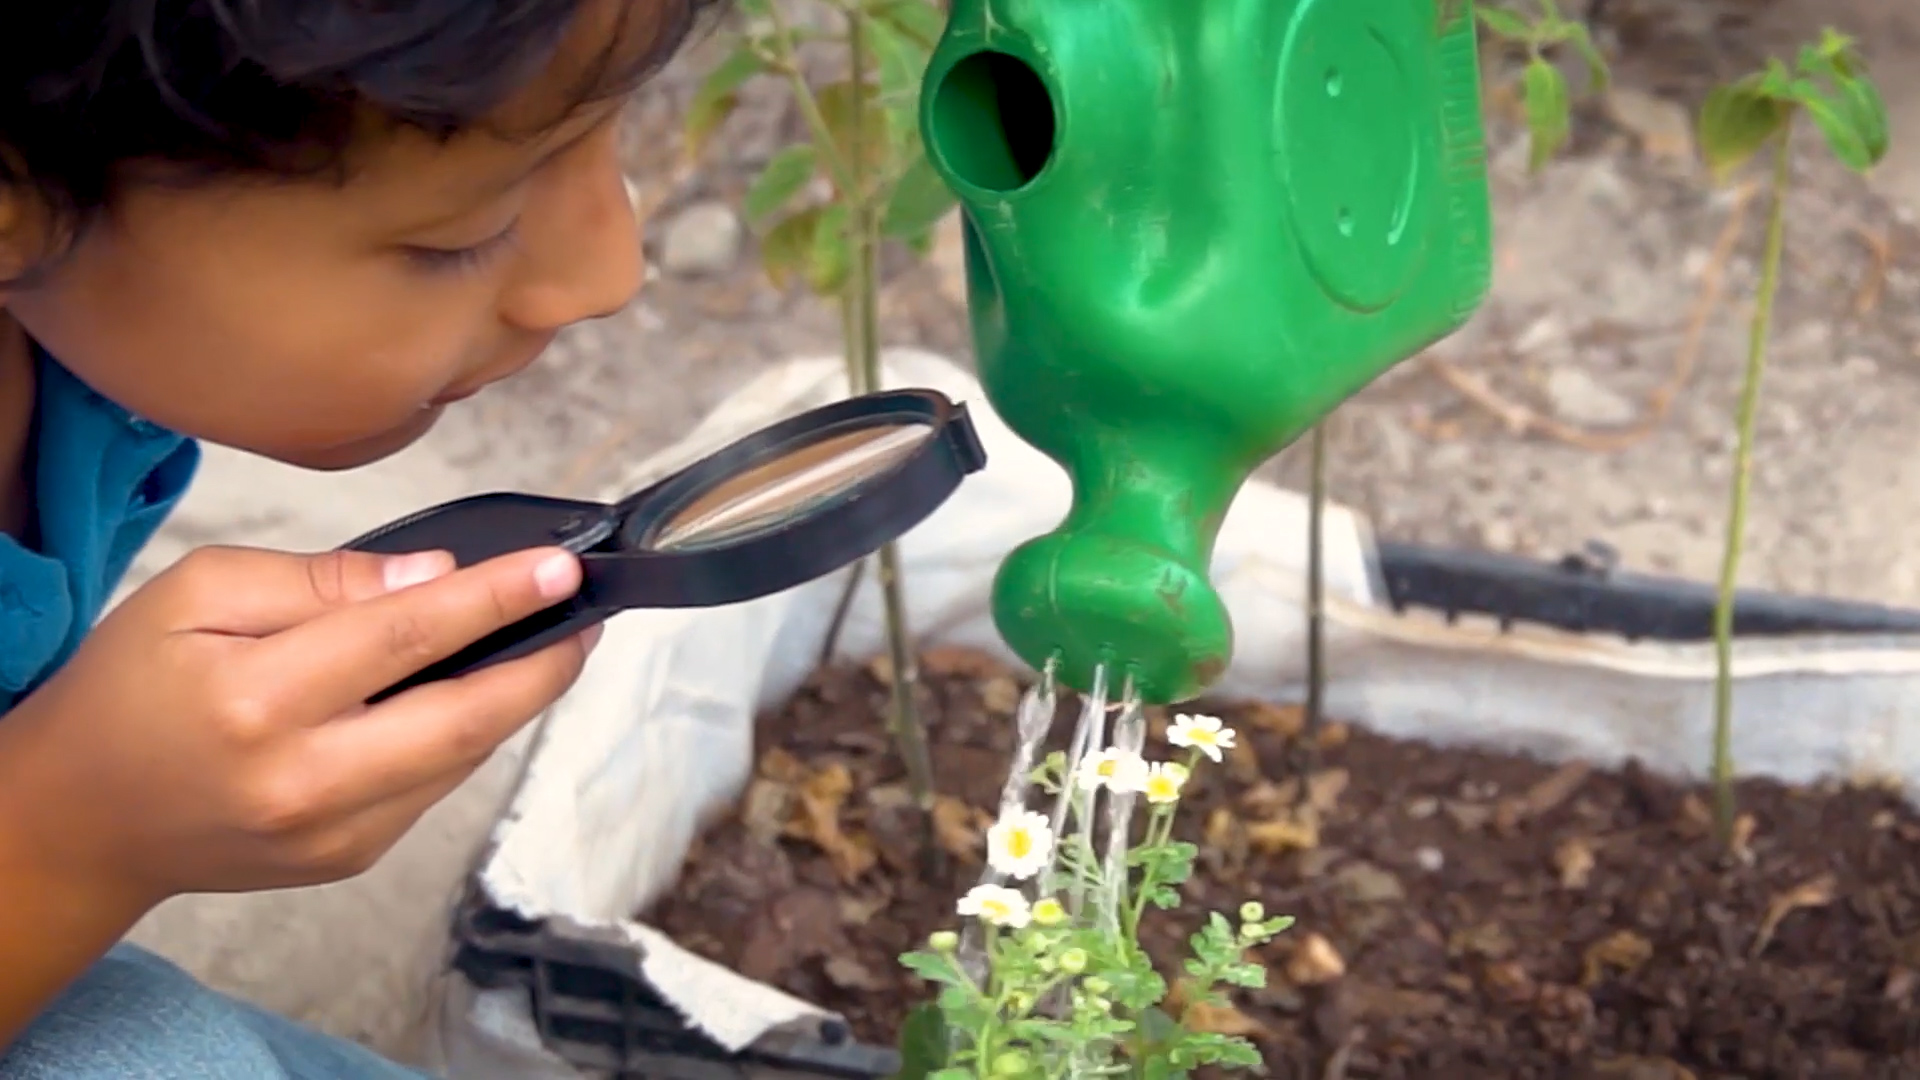 Child examines plant as he waters it